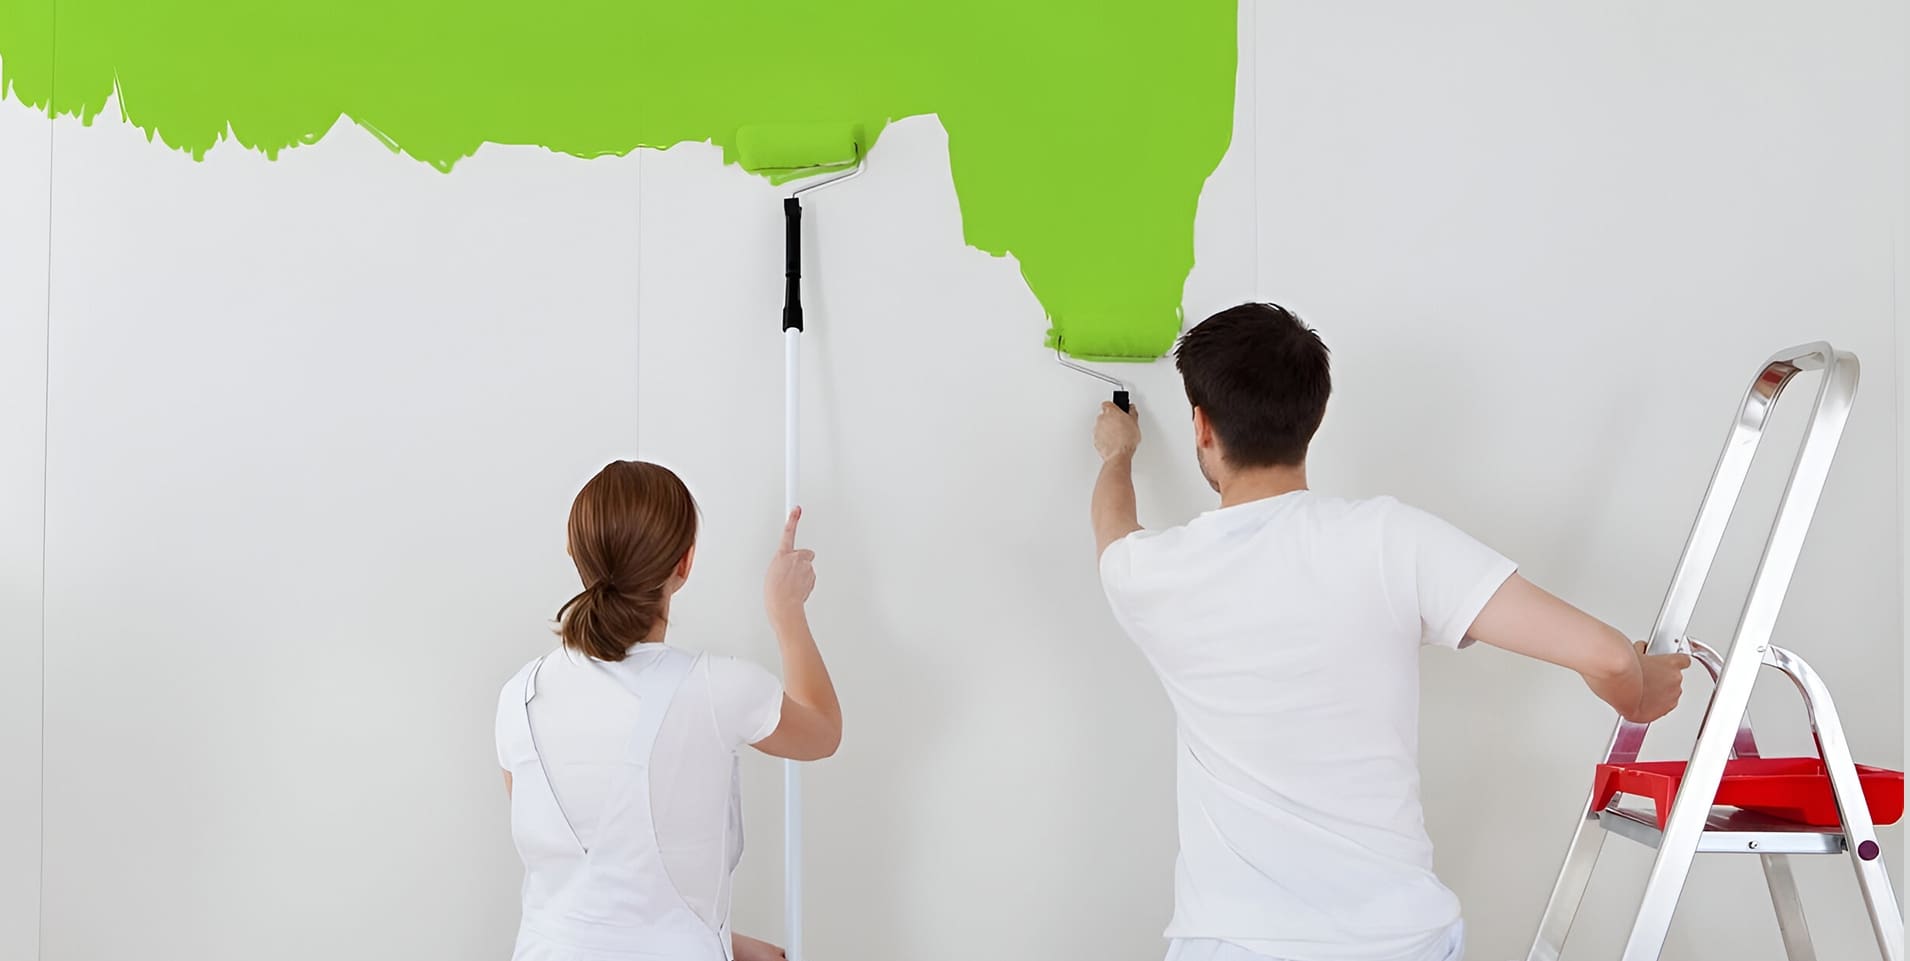 A man and woman painting the wall green.